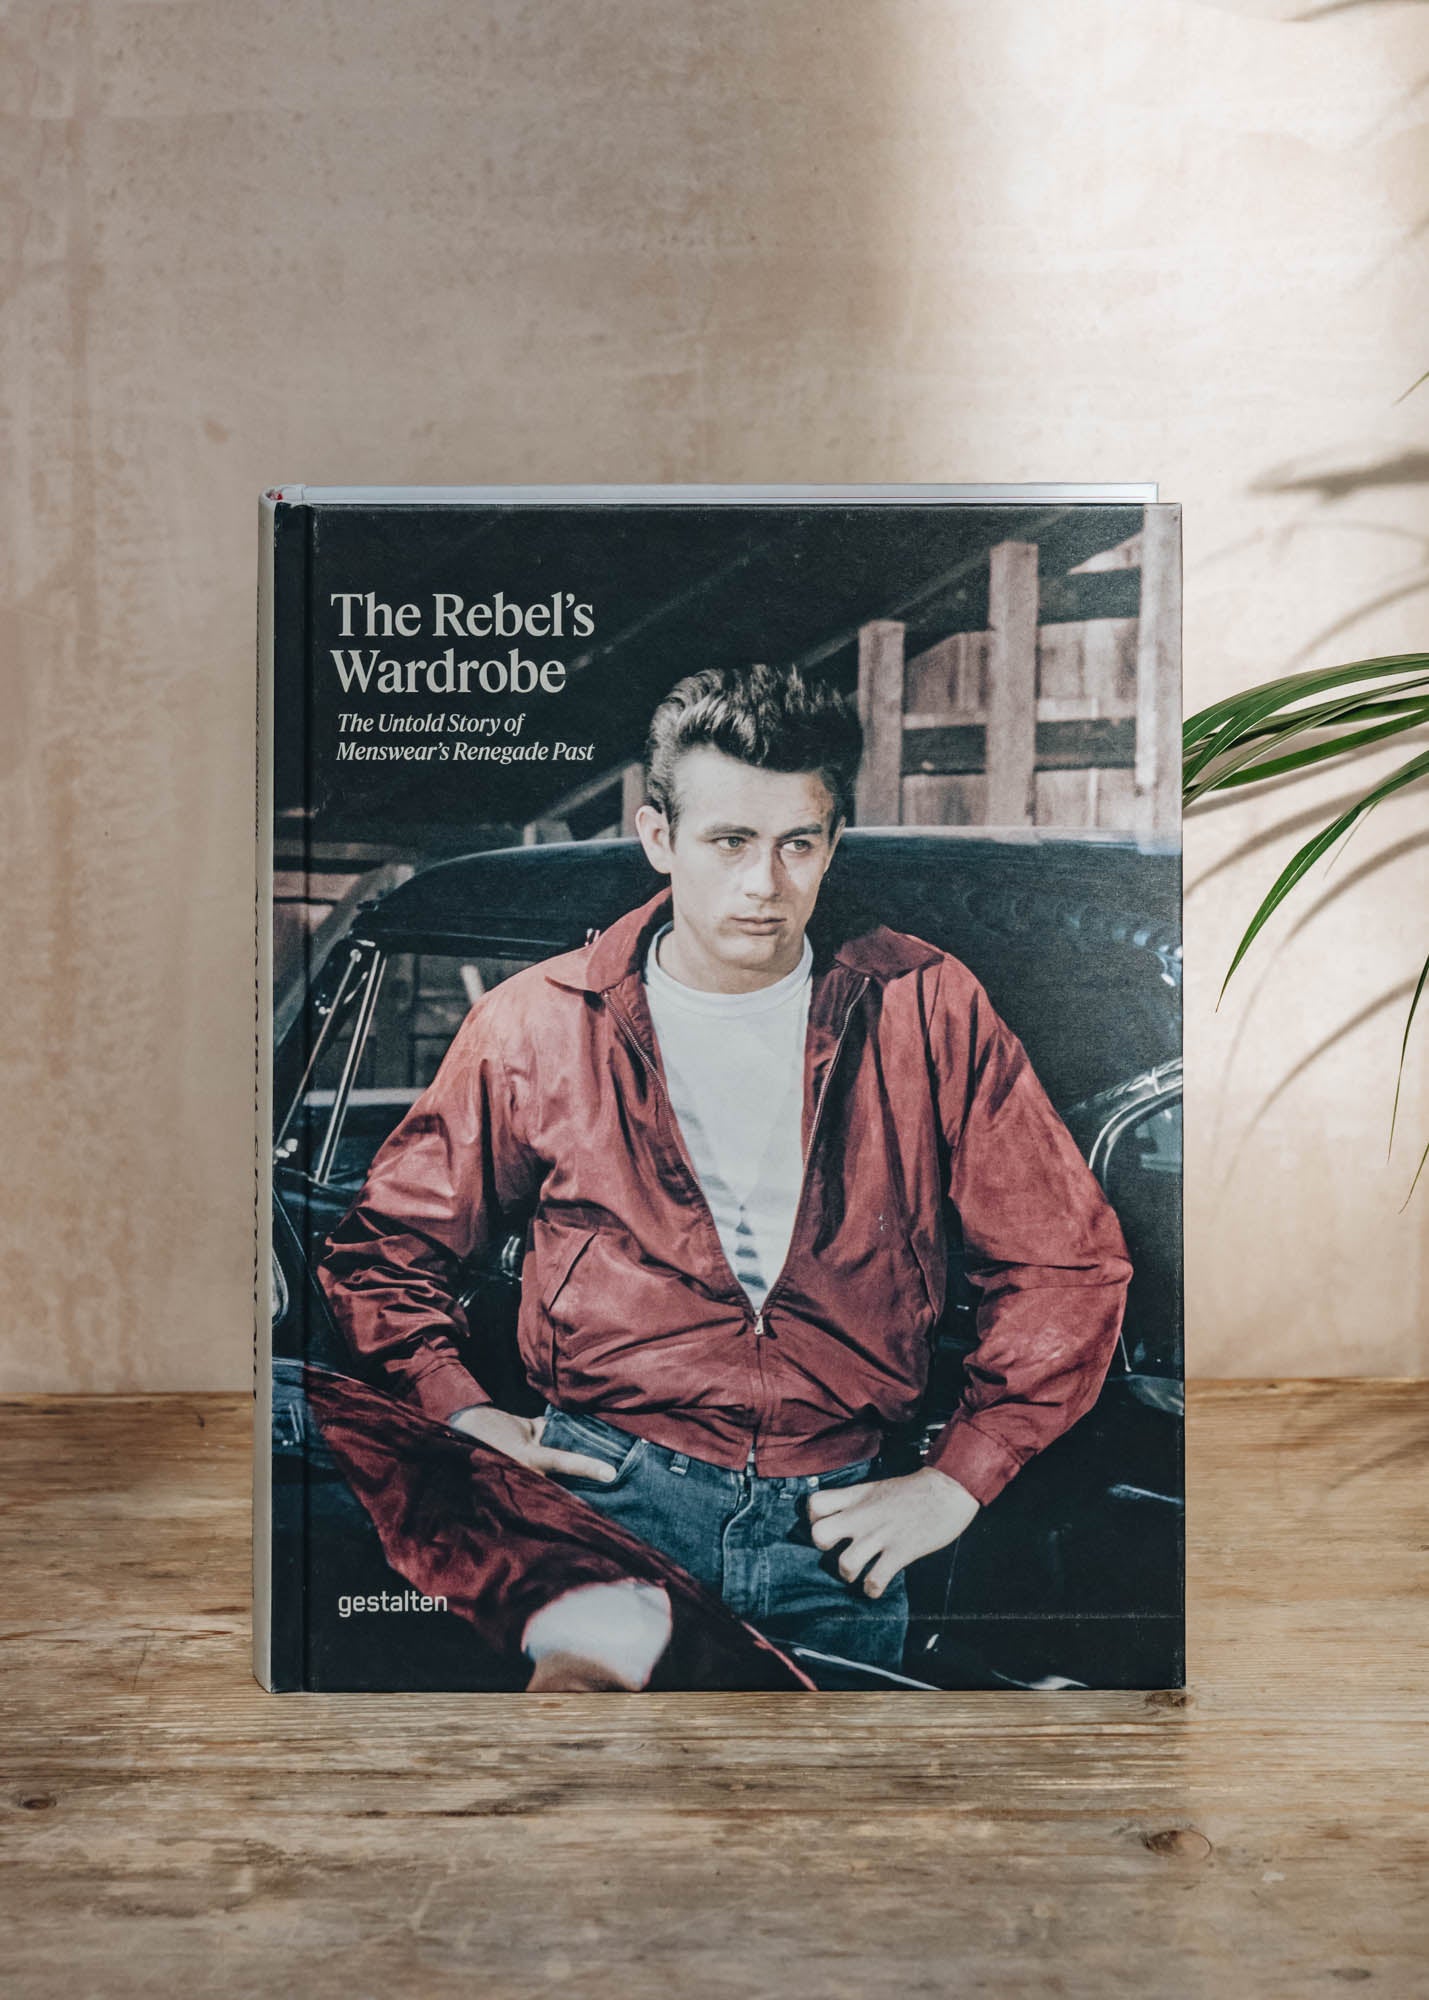 The Rebel’s Wardrobe: The Untold Story of Menswear’s Renegade Past